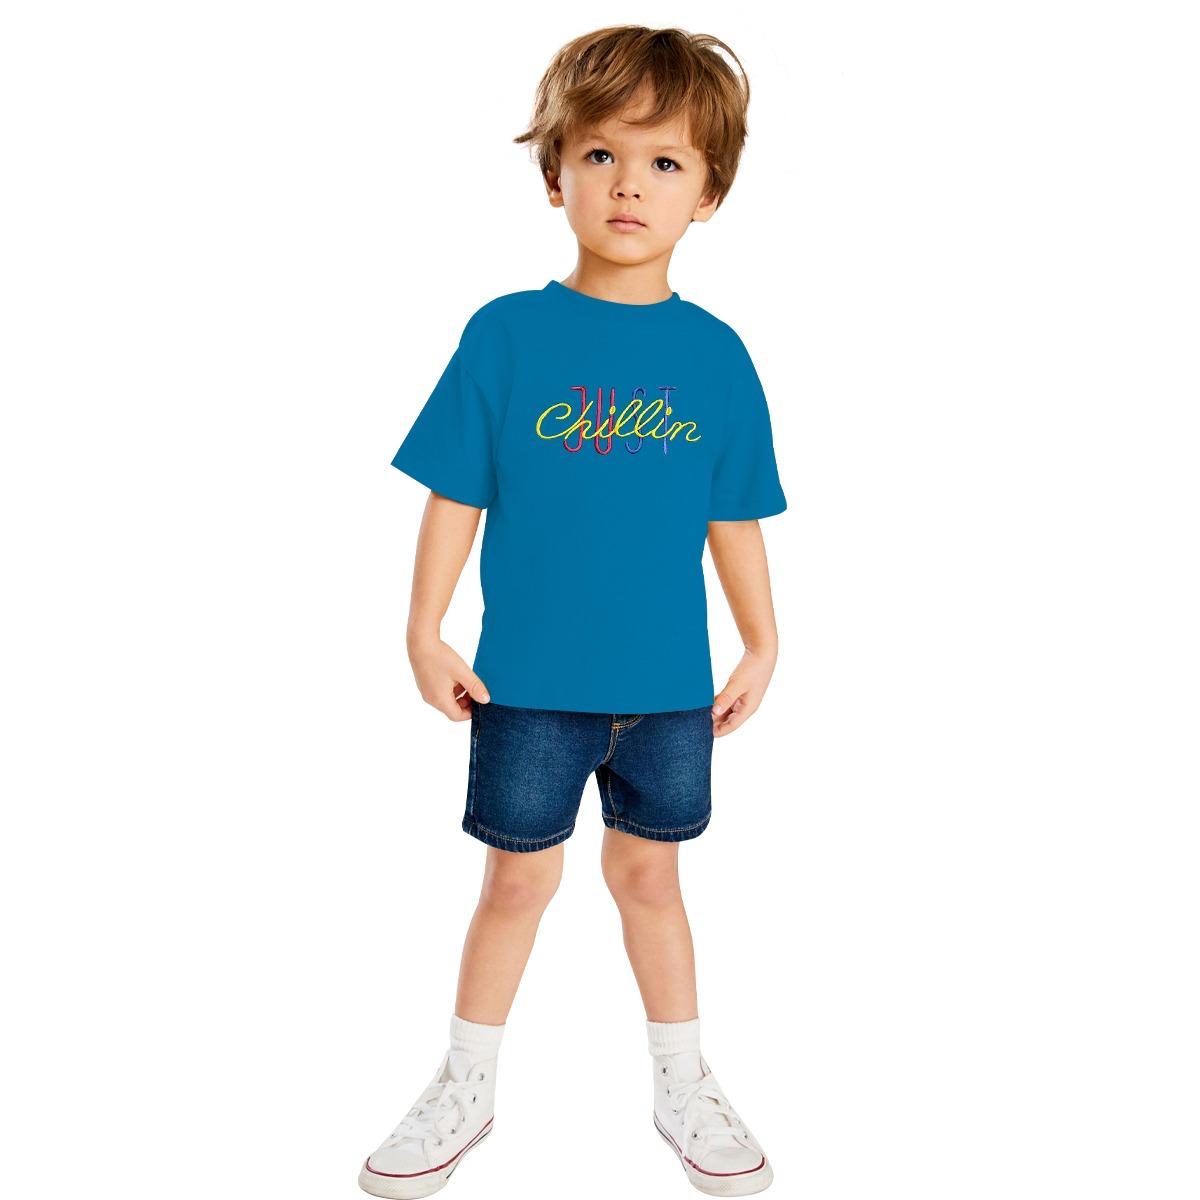 JUST CHILLING EMB O NECK BOY'S TEE SHIRT - TURQUOISE